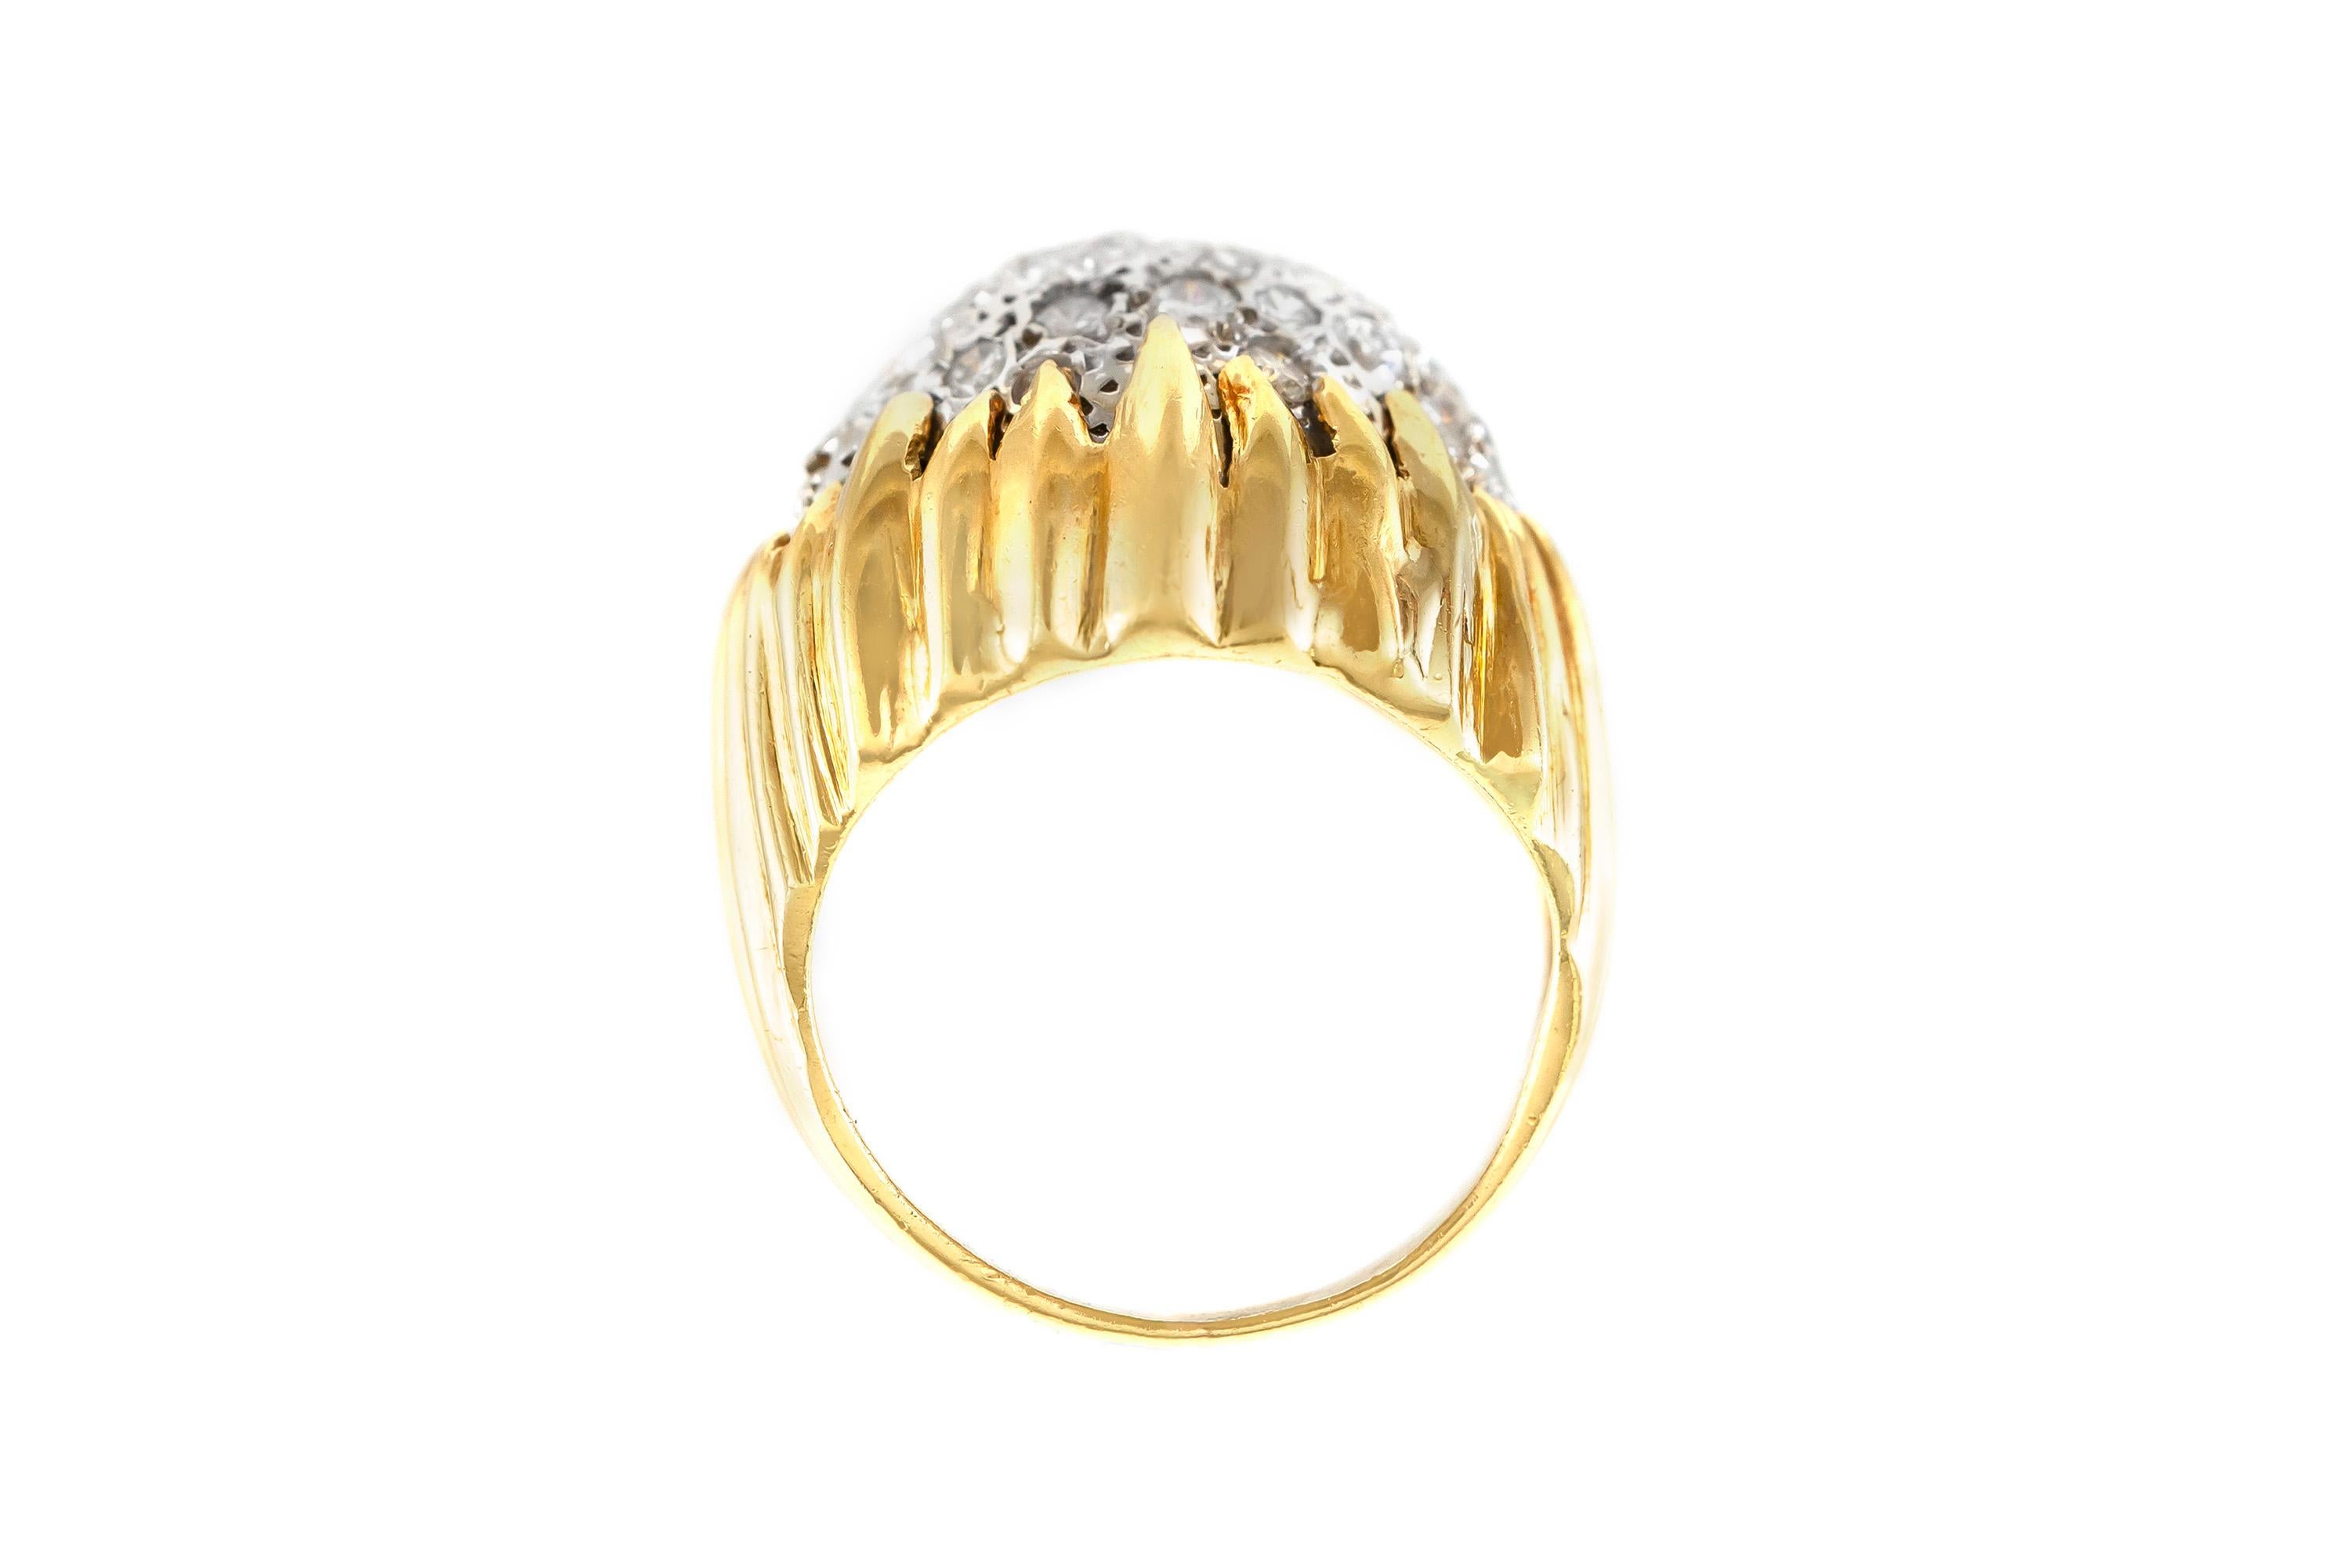 The ring is finely crafted in 18k yellow gold with diamonds weighing approximately 2.00 carat.
Can be resized .
Circa 1960.
